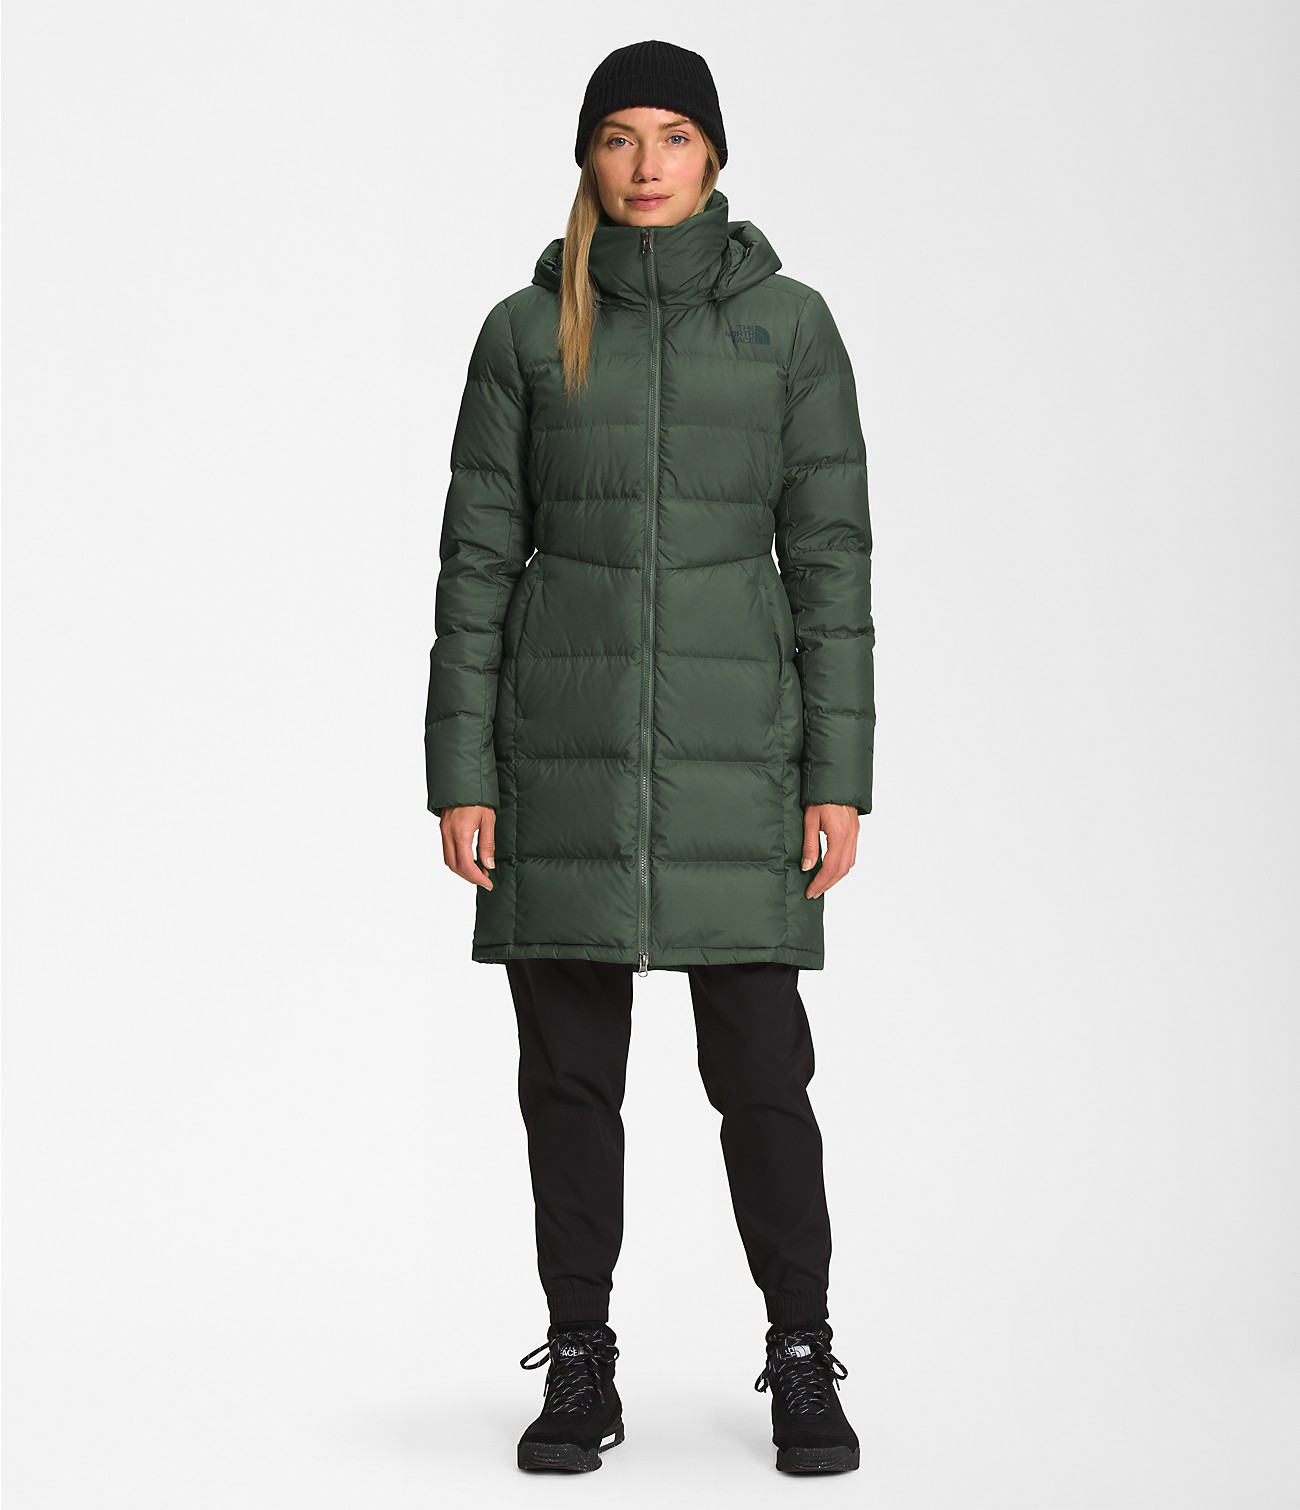 Unlock Wilderness' choice in the Eddie Bauer Vs North Face comparison, the Metropolis Parka by The North Face